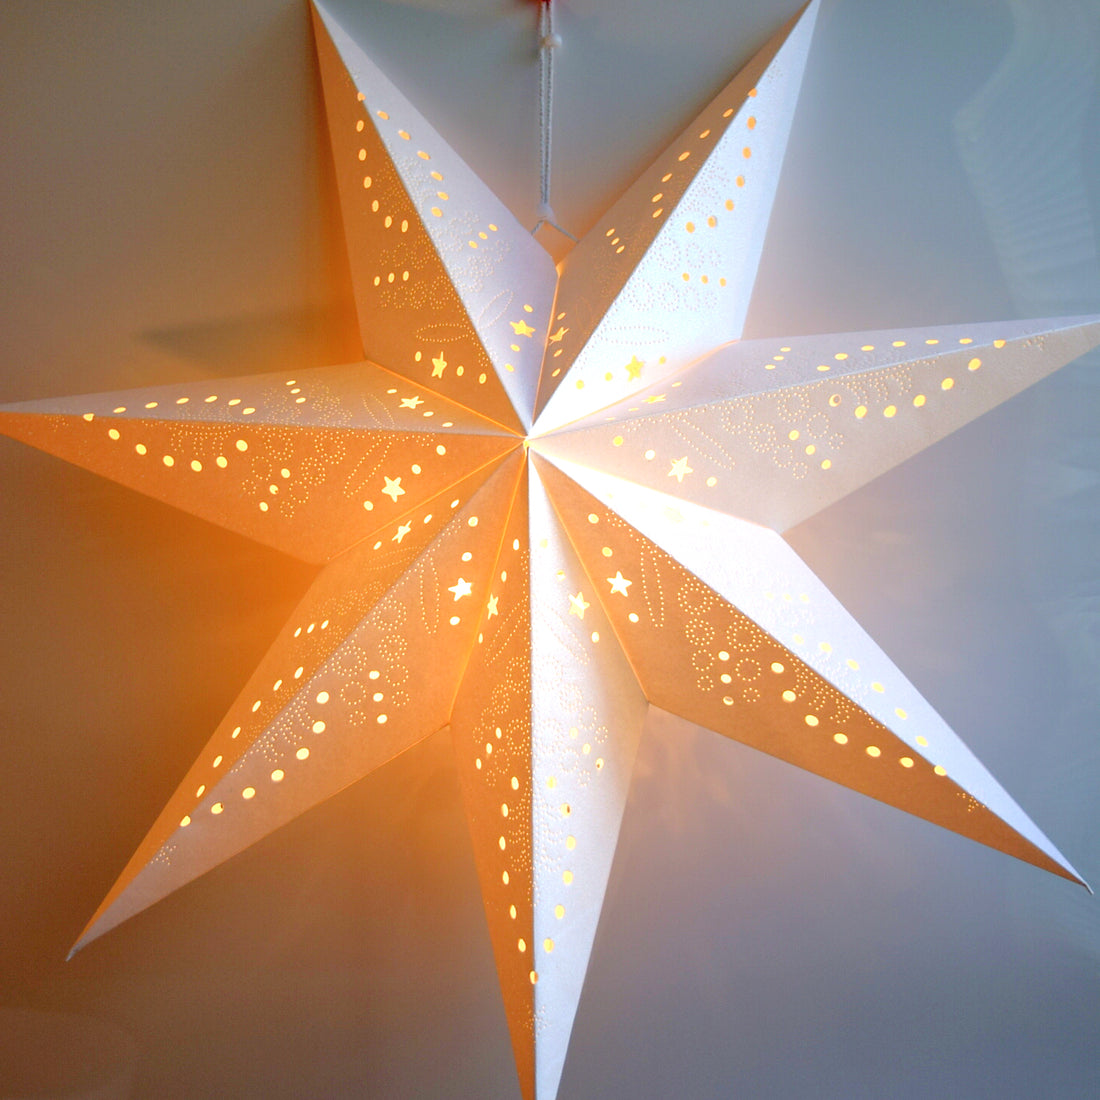 Unique Gift Ideas: Why Star Lanterns Are the Perfect Present